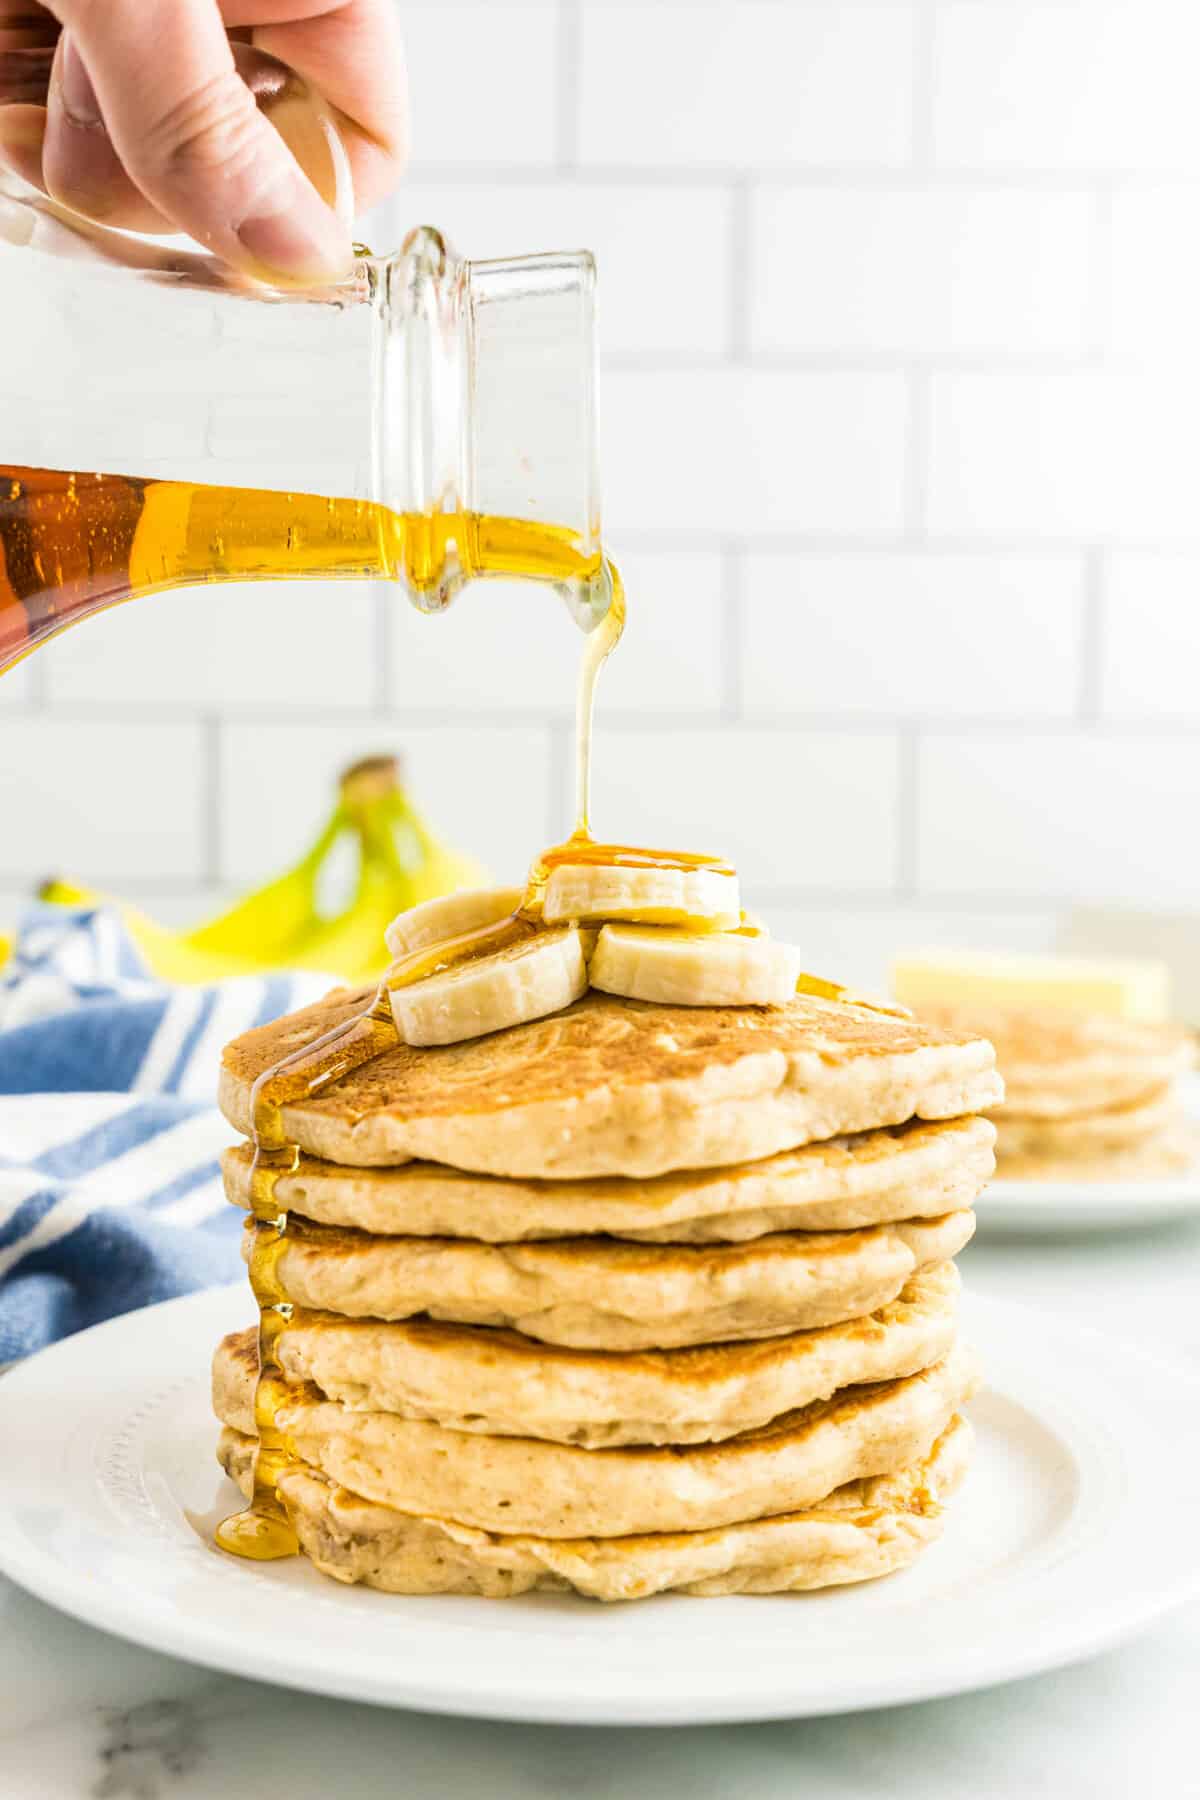 Pouring syrup on stack of banana pancakes